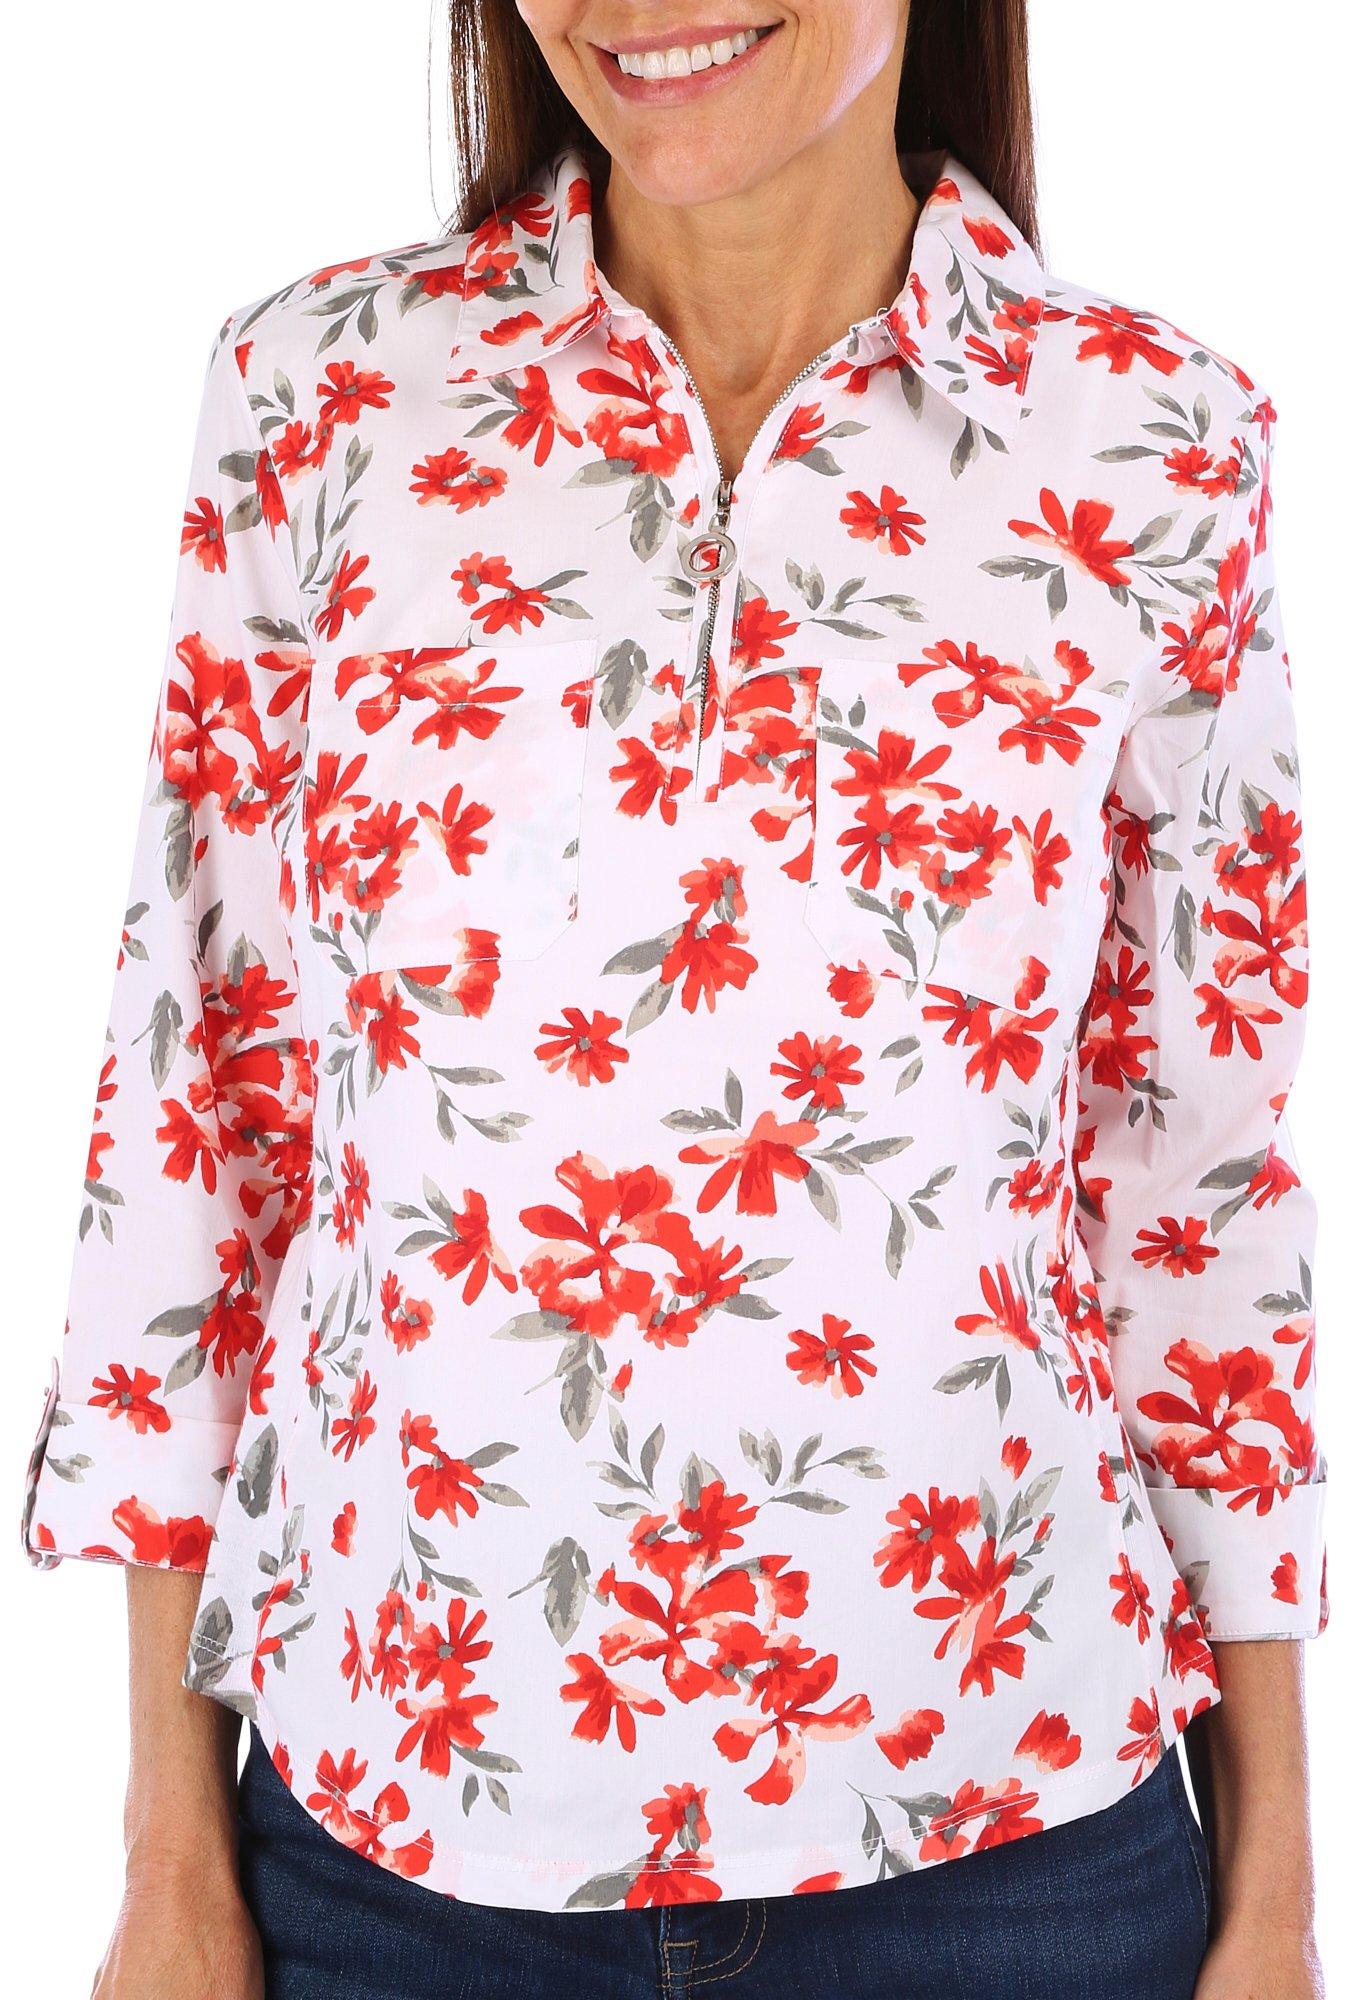 Coral Bay Petites  Floral Knit To Fit  Zip 3/4 Sleeve Top